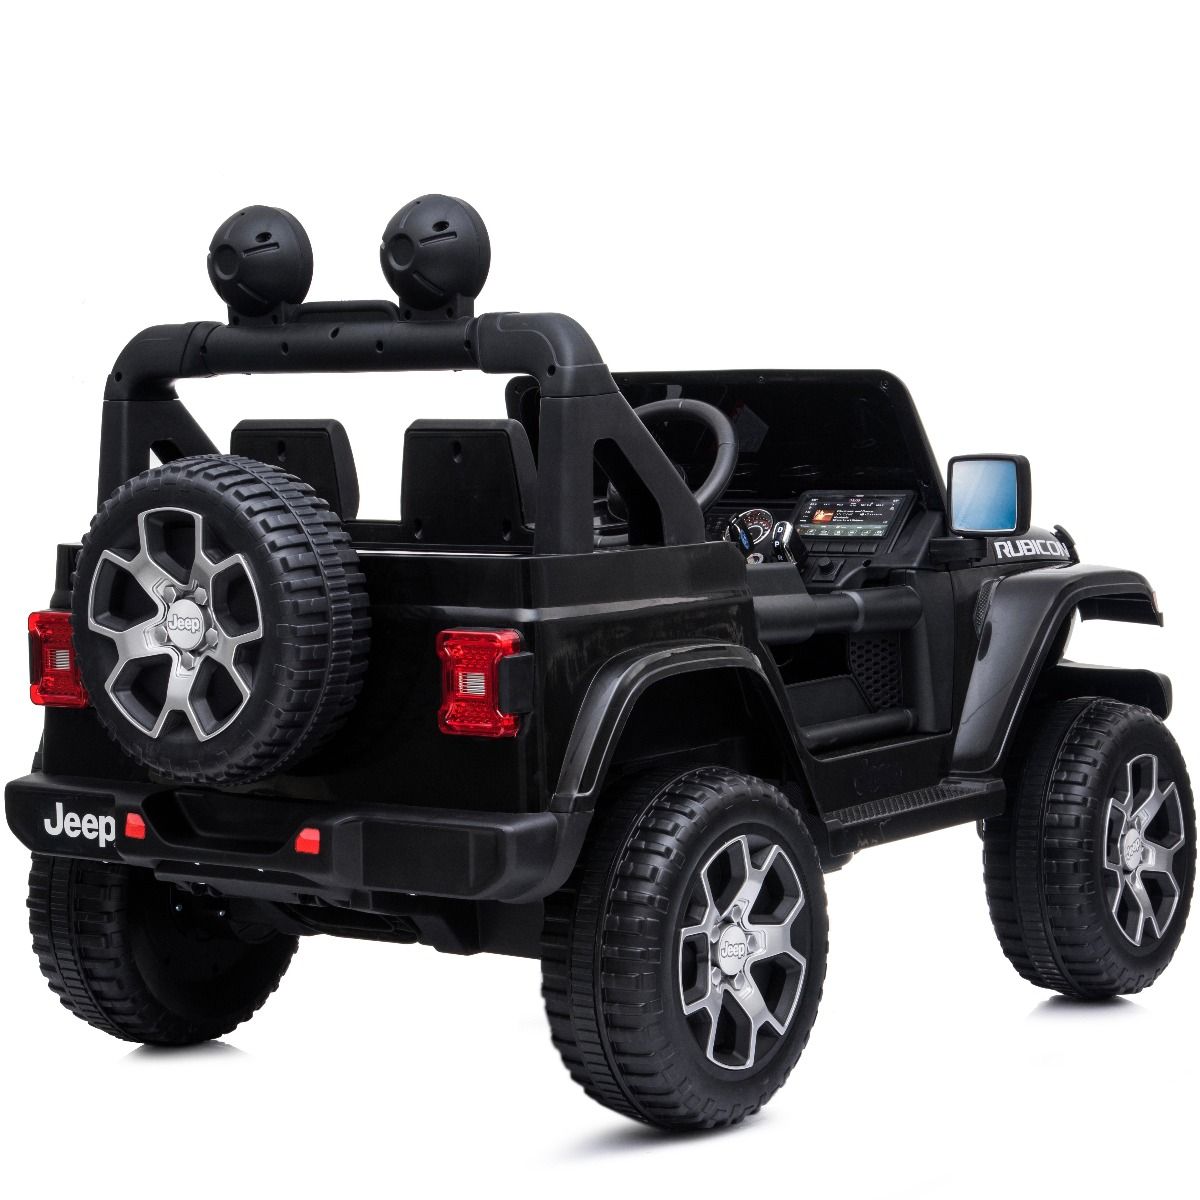 Black Jeep Rubicon children's electric ride-on car with oversized wheels and additional seating.